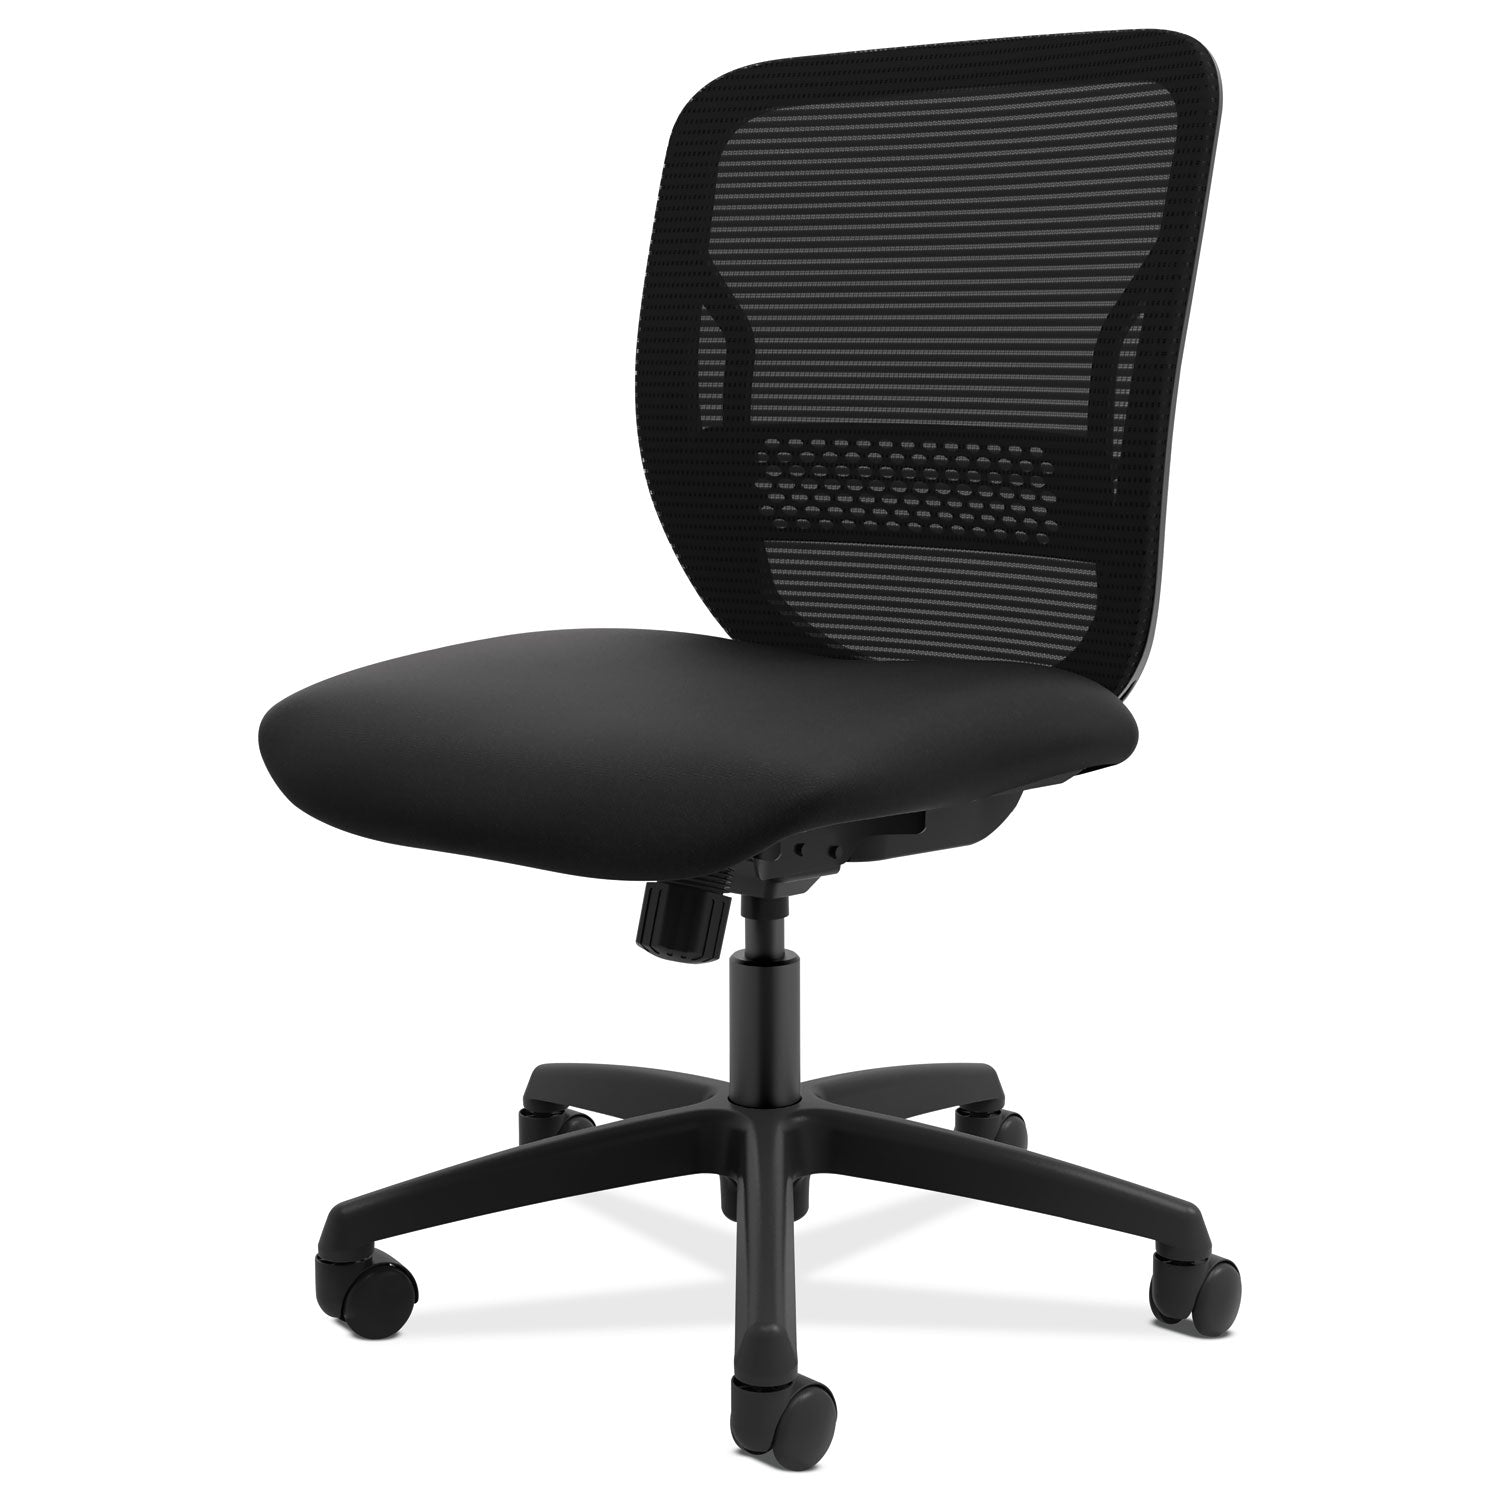 gateway-mid-back-task-chair-supports-up-to-250-lb-17-to-22-seat-height-black_hongvnmz1accf10 - 1